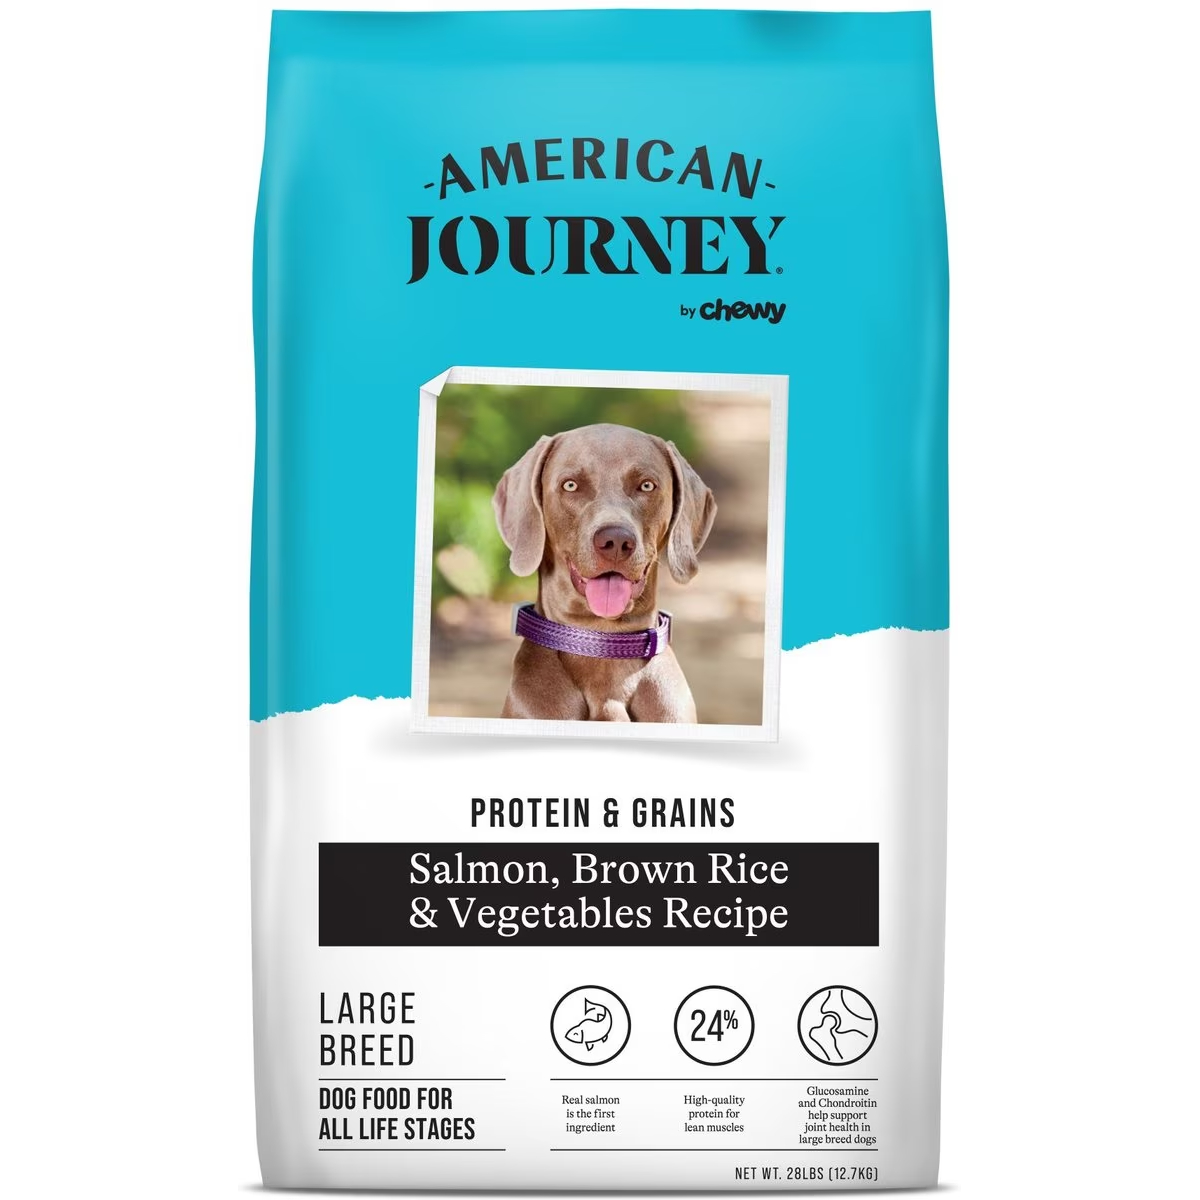 American Journey Protein & Grains Large Breed Salmon, Brown Rice & Vegetables Recipe Dry Dog Food